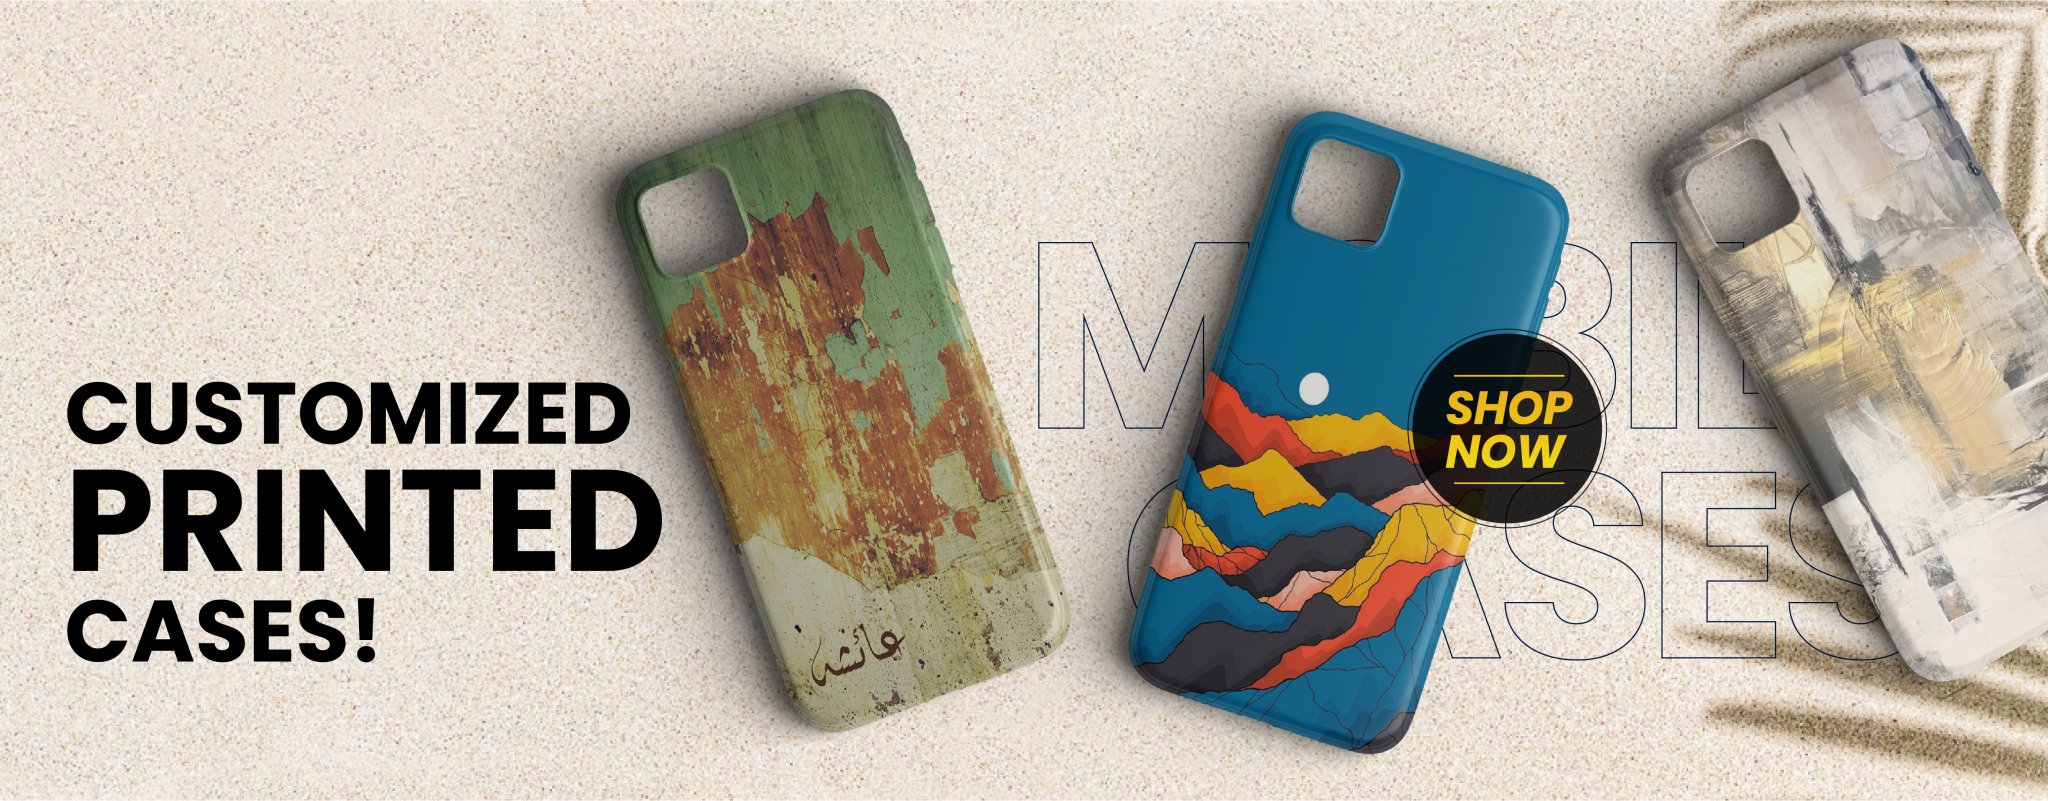 Printed Customized Mobile Cases